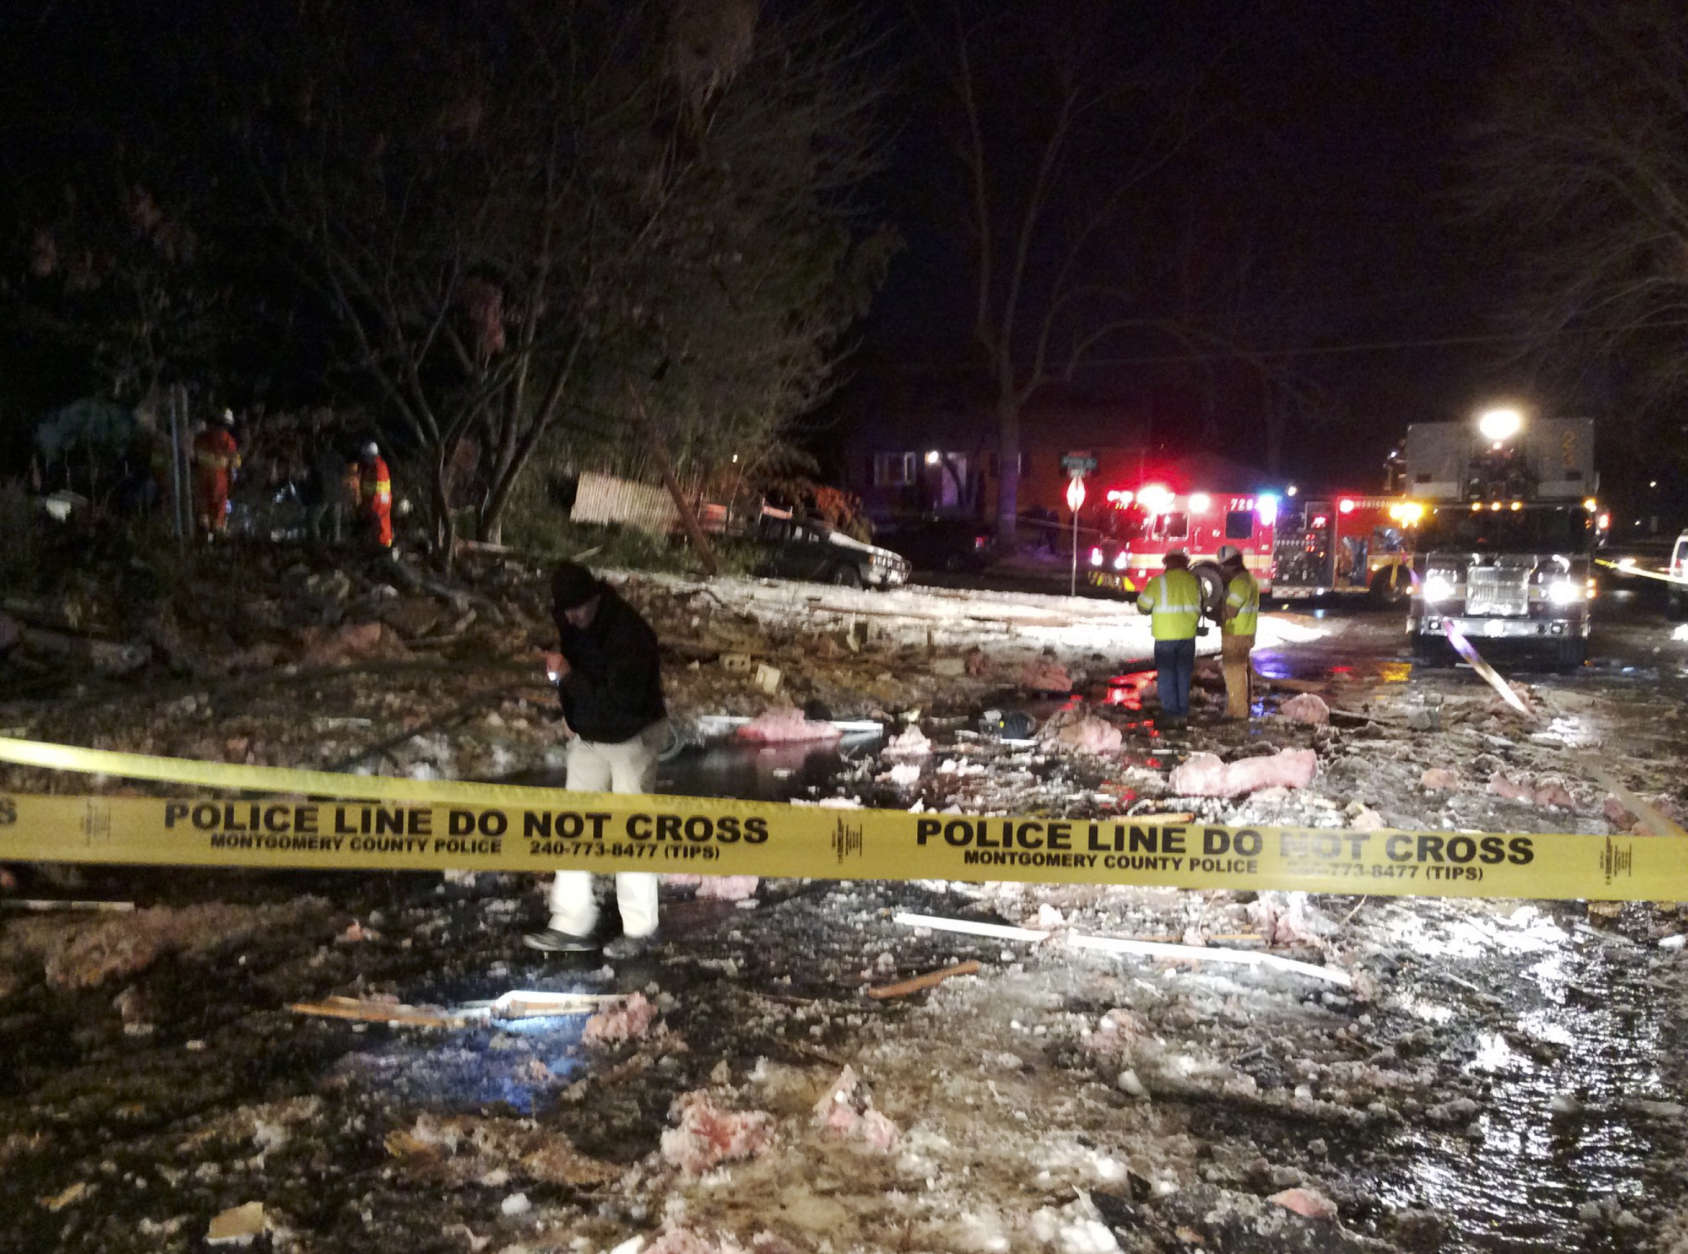 In this photo provided by the Montgomery County fire &amp; Rescue Service, emergency personnel work at the scene of a leveled house in Rockville, Md., Friday, March 17, 2017. Authorities said the explosion occurred about 1 a.m. Friday and reduced the home to a "pile of bricks." (Montgomery County fire &amp; Rescue Service via AP)